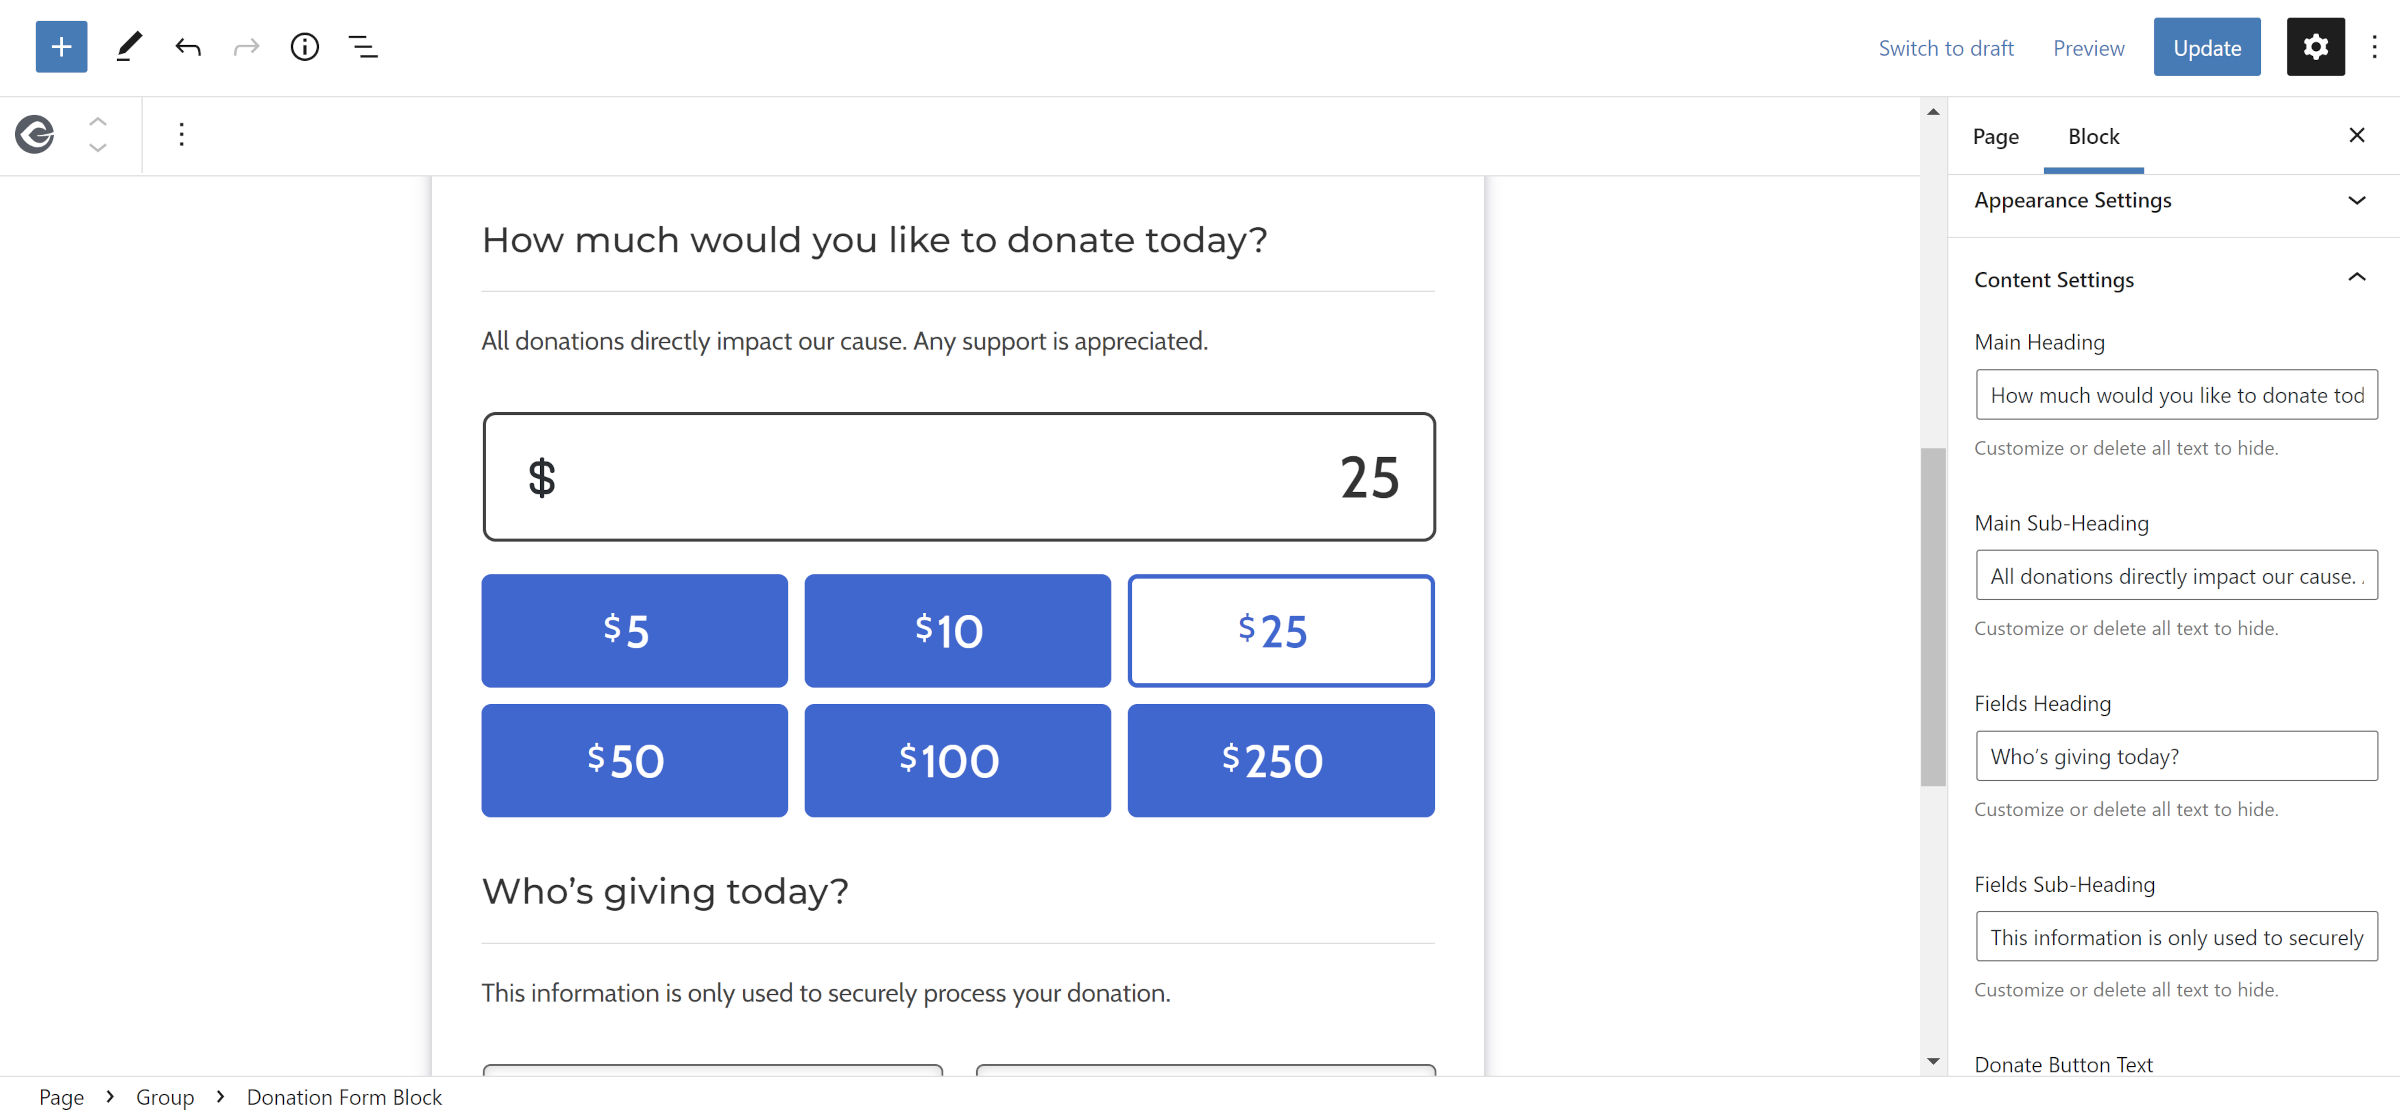 givewp-launches-standalone-donation-form-b​​lock-for-stripe-2 GiveWP 为 Stripe 推出独立捐赠表格块